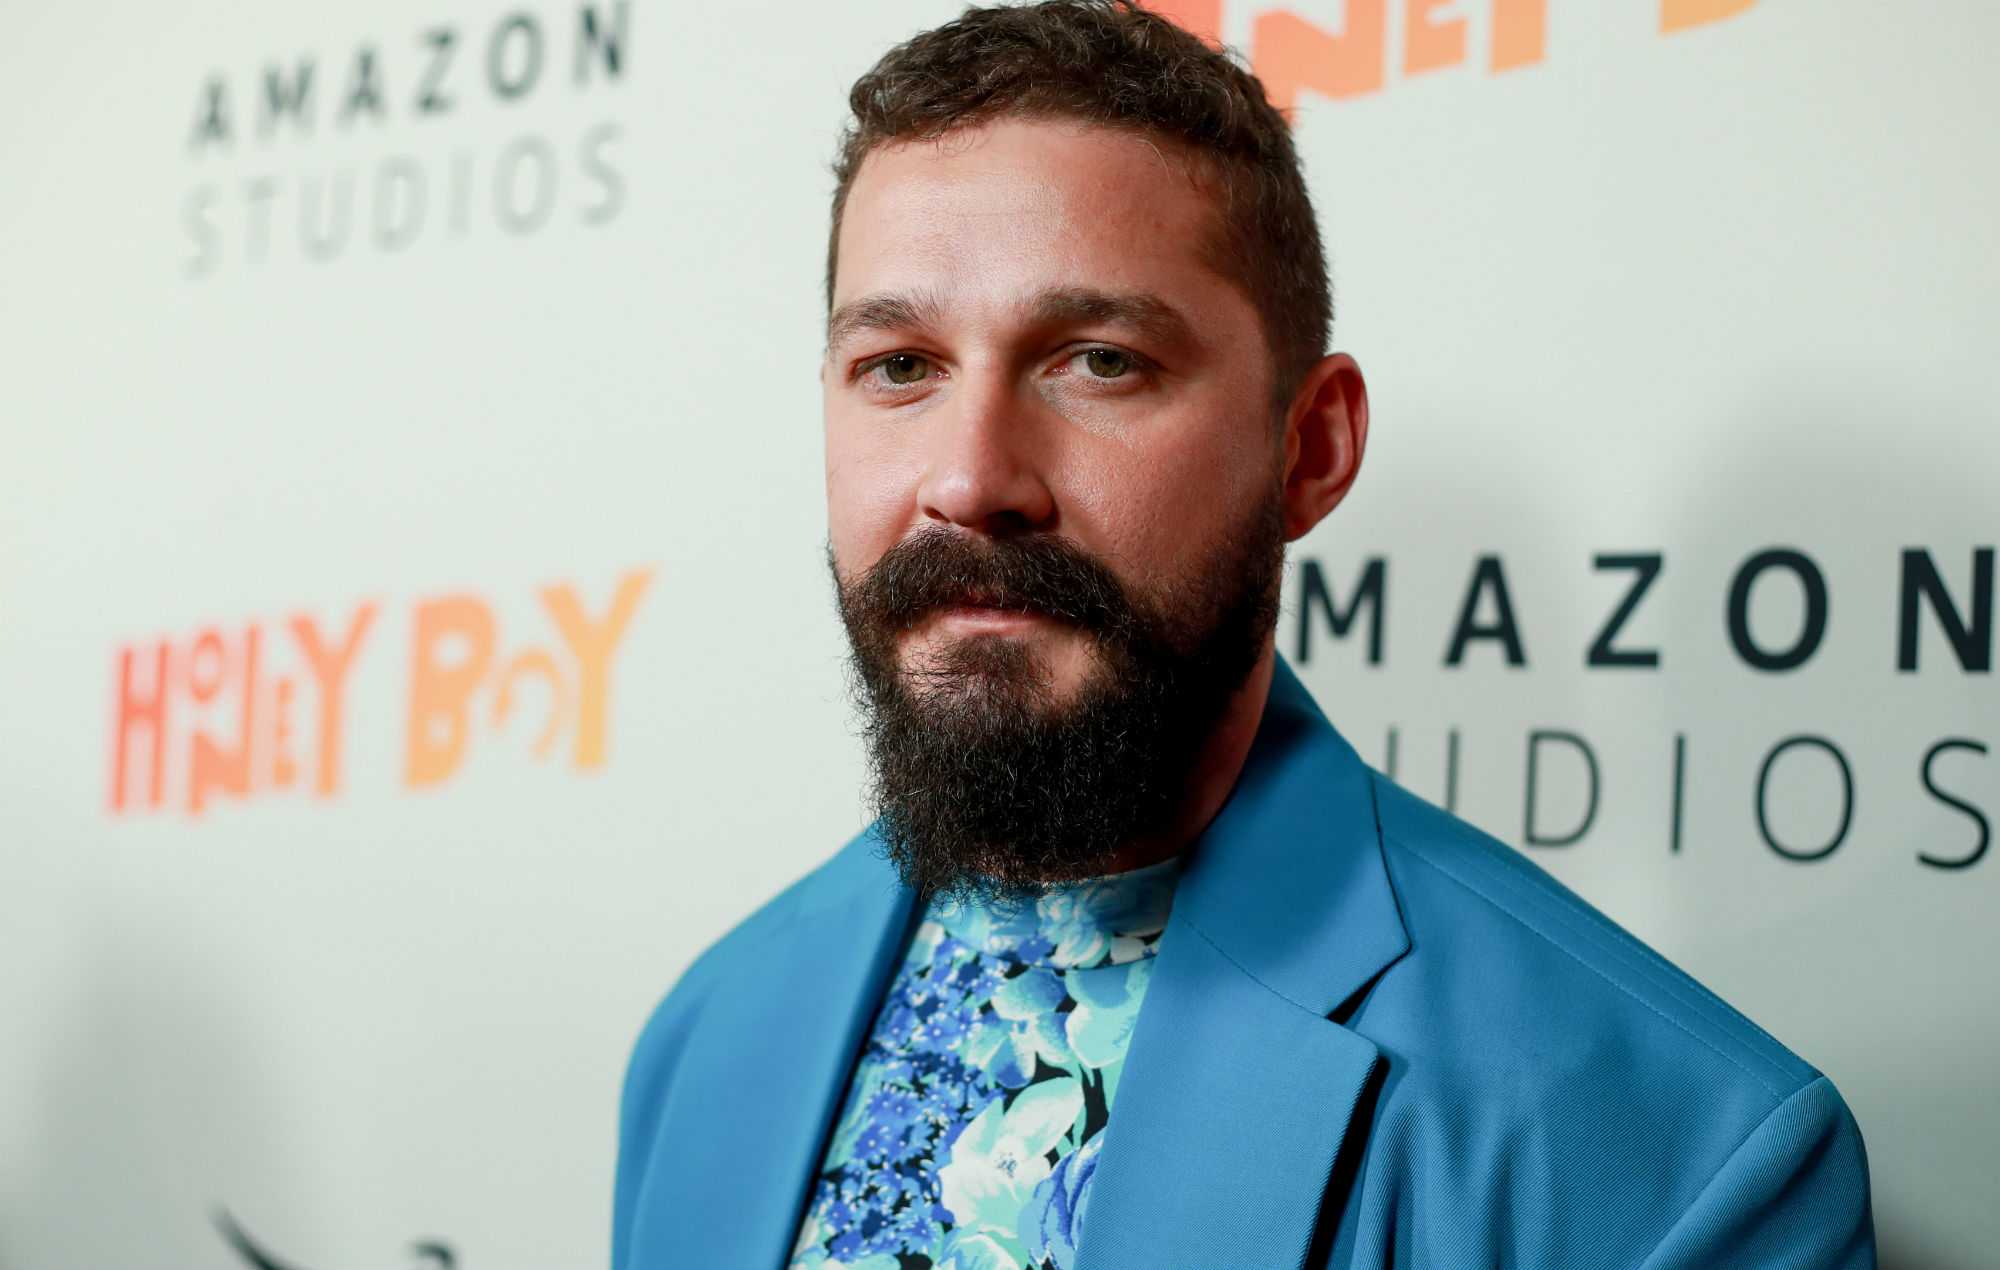 From Rising Star to Accused Abuser: A Deep Dive into Shia LaBeouf's Tumultuous Journey